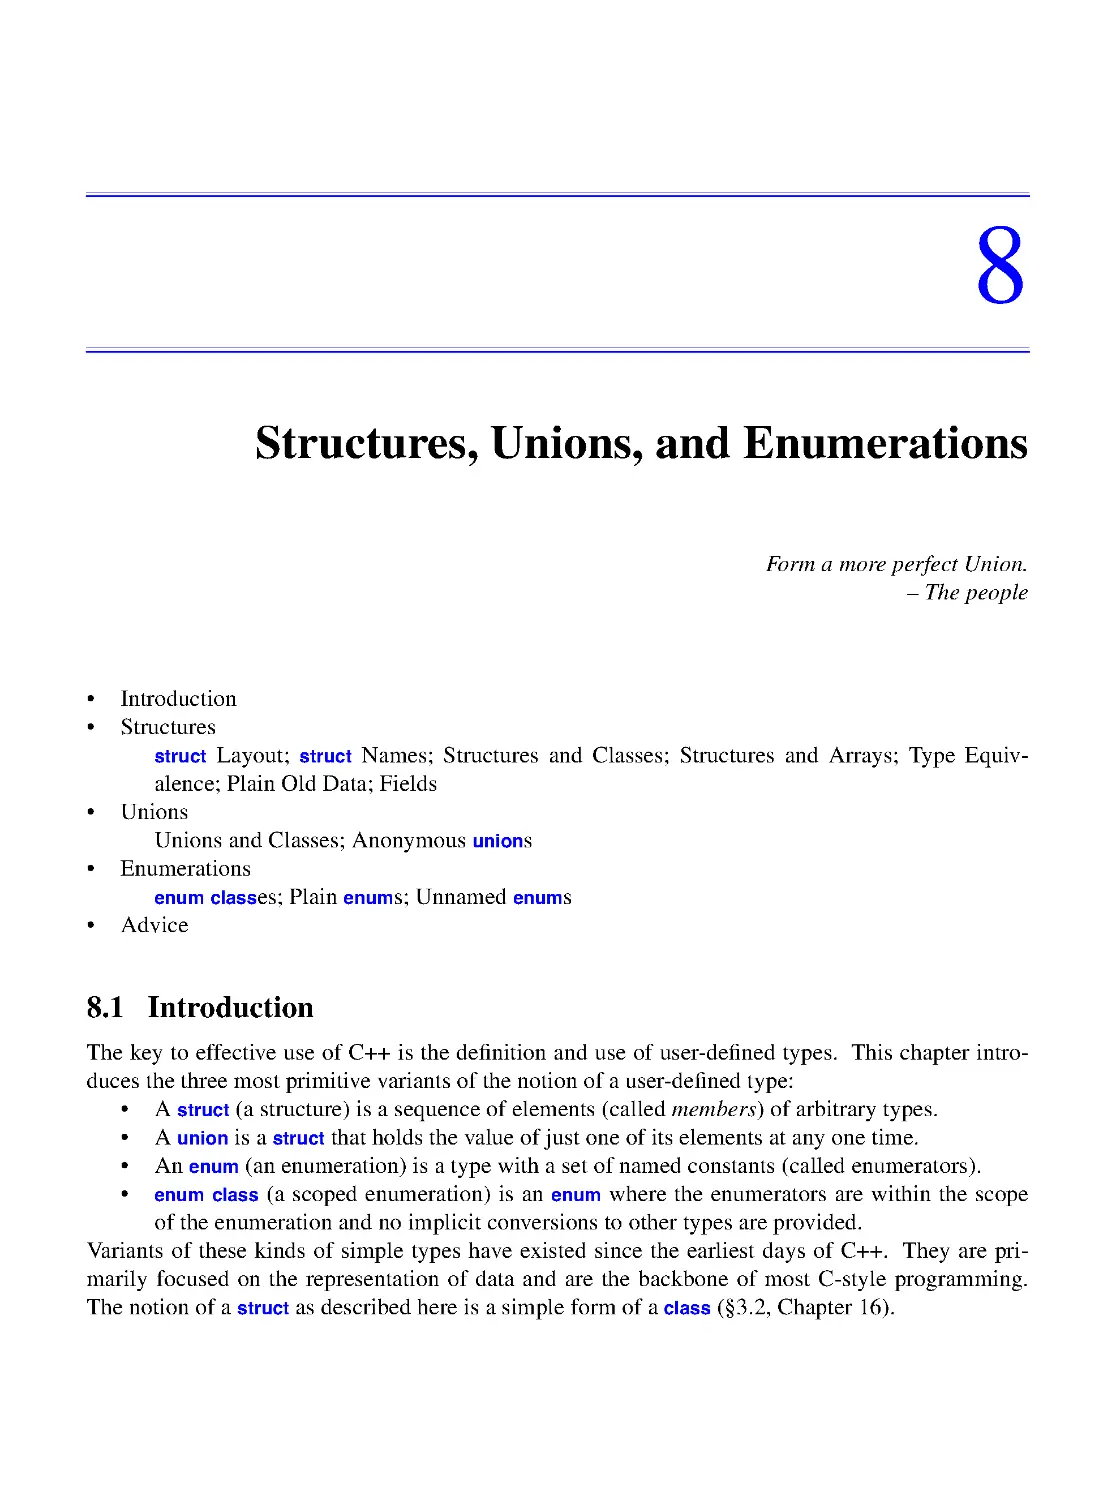 8. Structures, Unions, and Enumerations